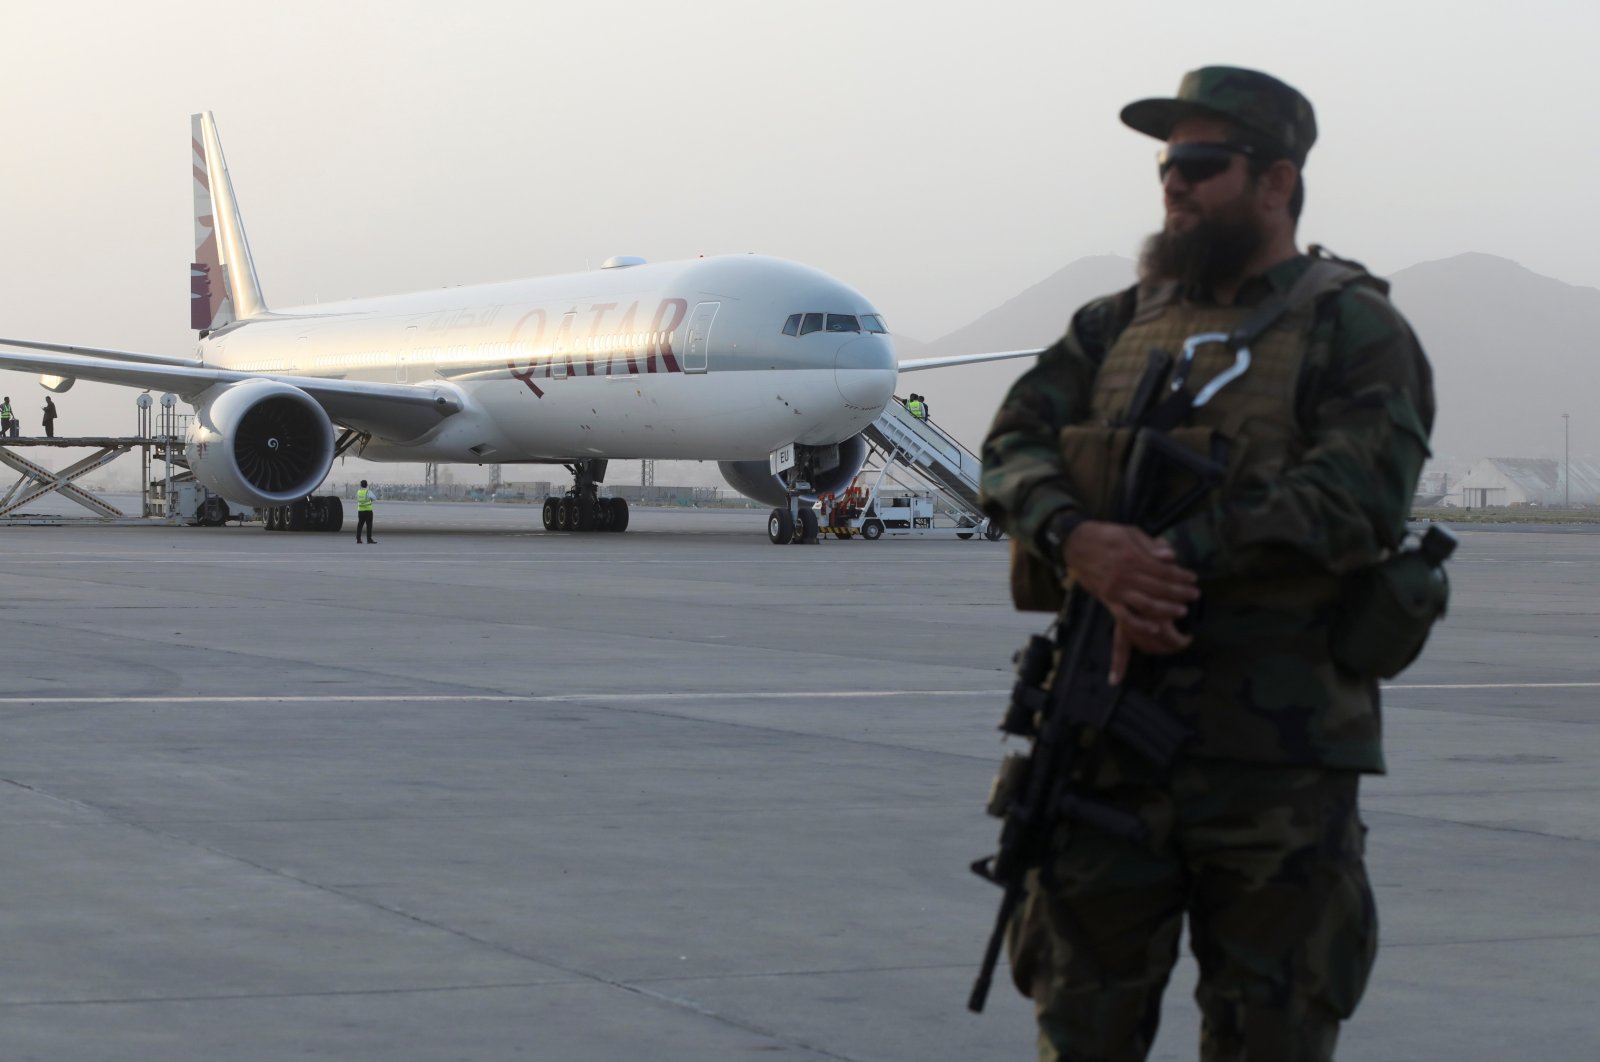 A member of Taliban security forces stands guard in front of a Qatar Airways airplane at the international airport in Kabul, Afghanistan, Sept. 10, 2021. (Reuters Photo)